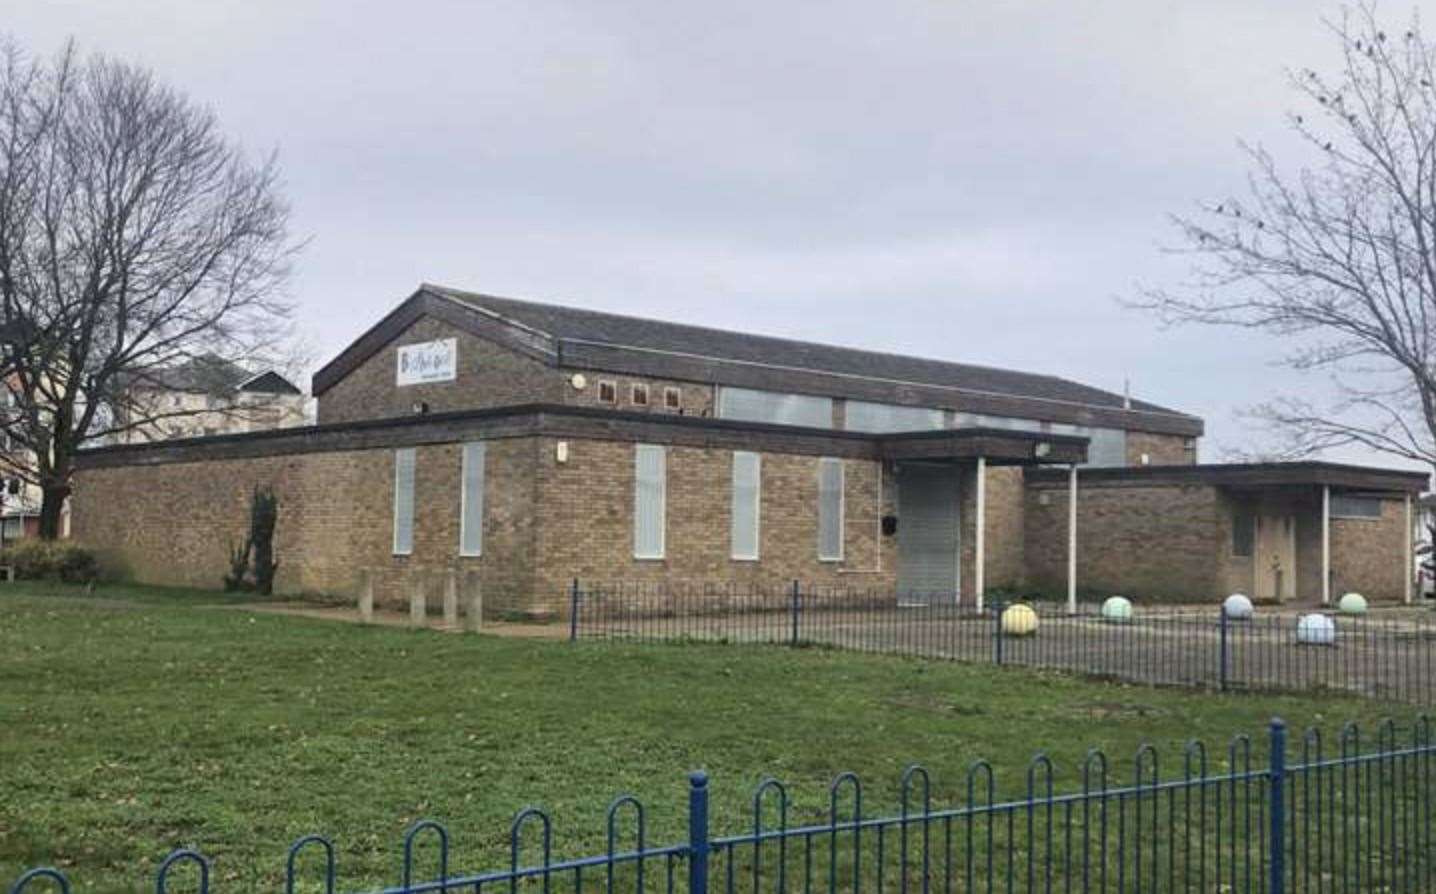 Bockhanger Community Centre served as a hub for 50 years